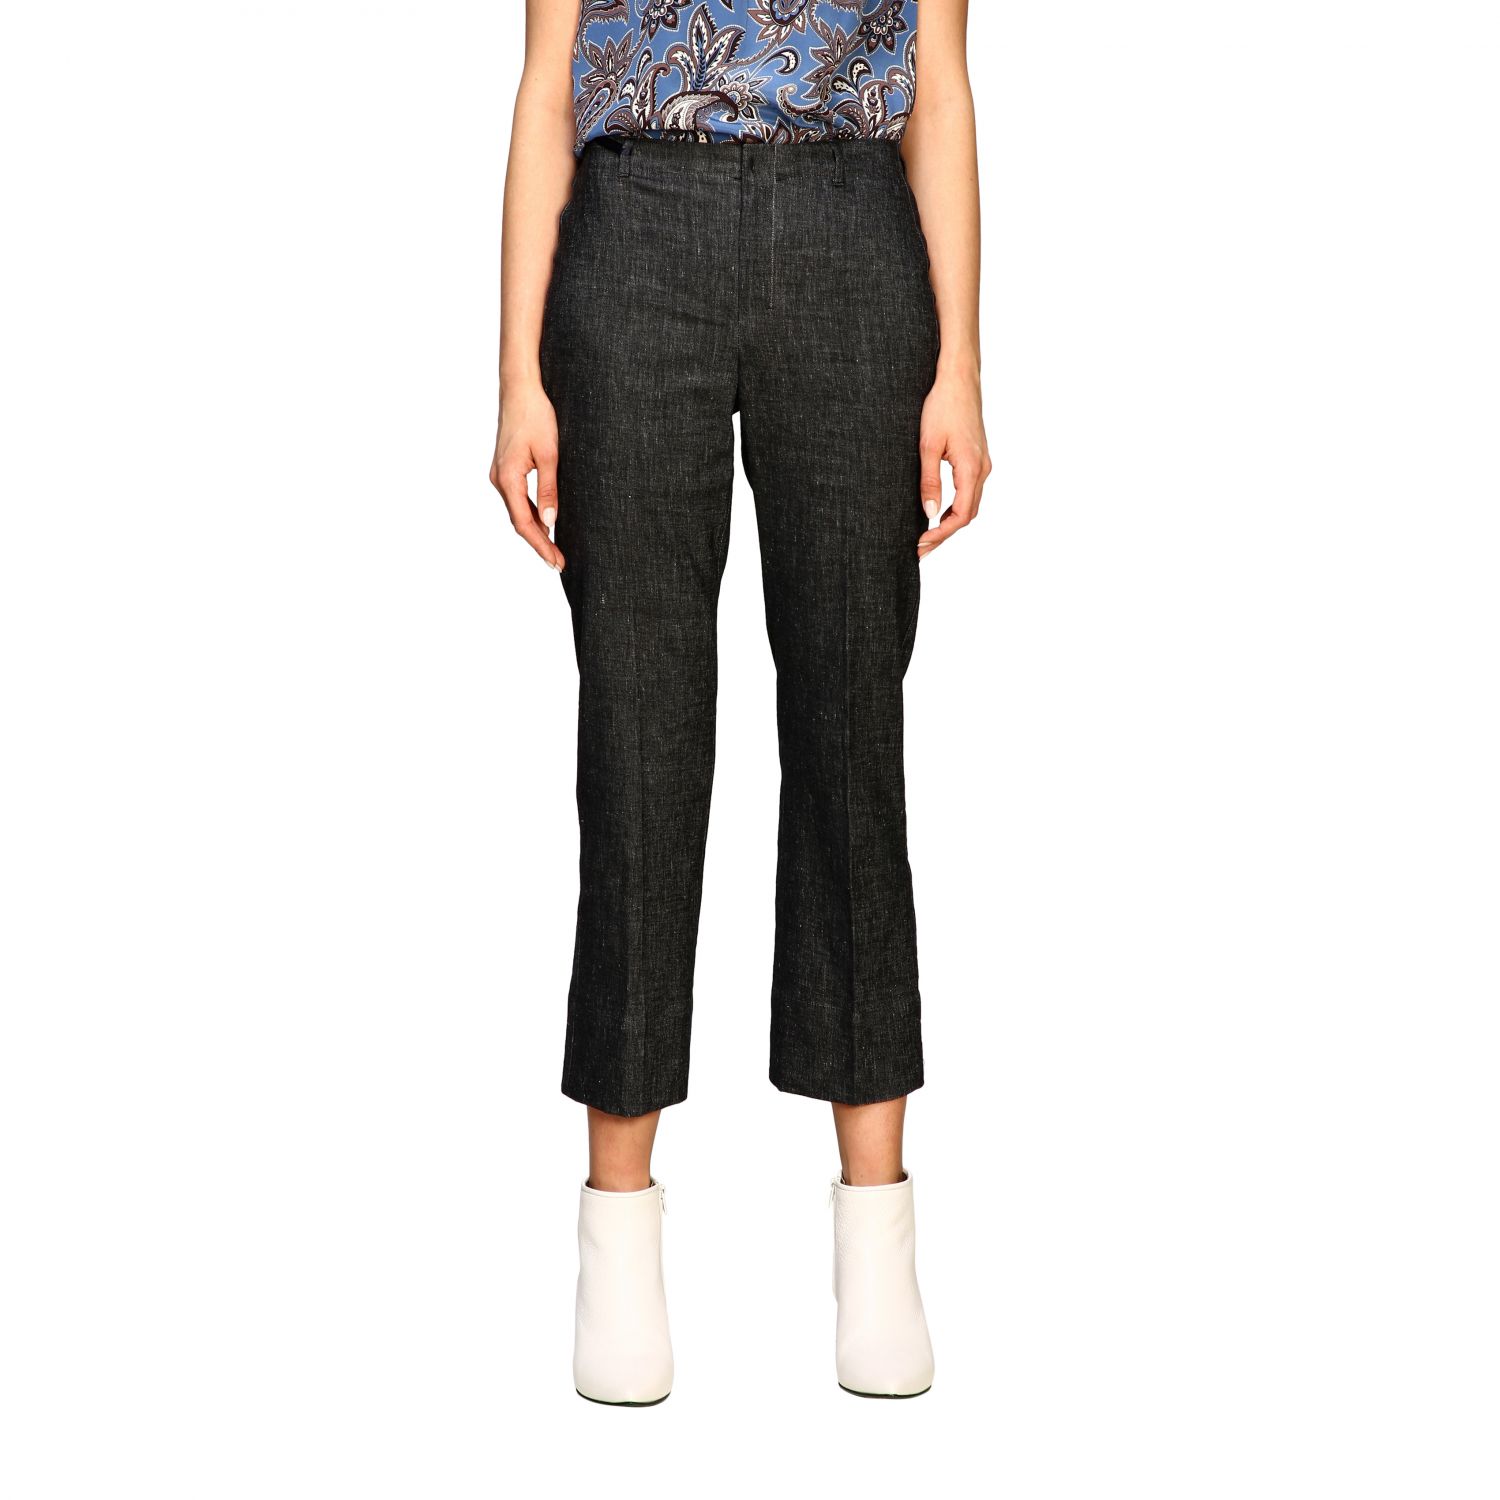 S Max Mara Outlet: trousers for women - Grey | S Max Mara trousers ...